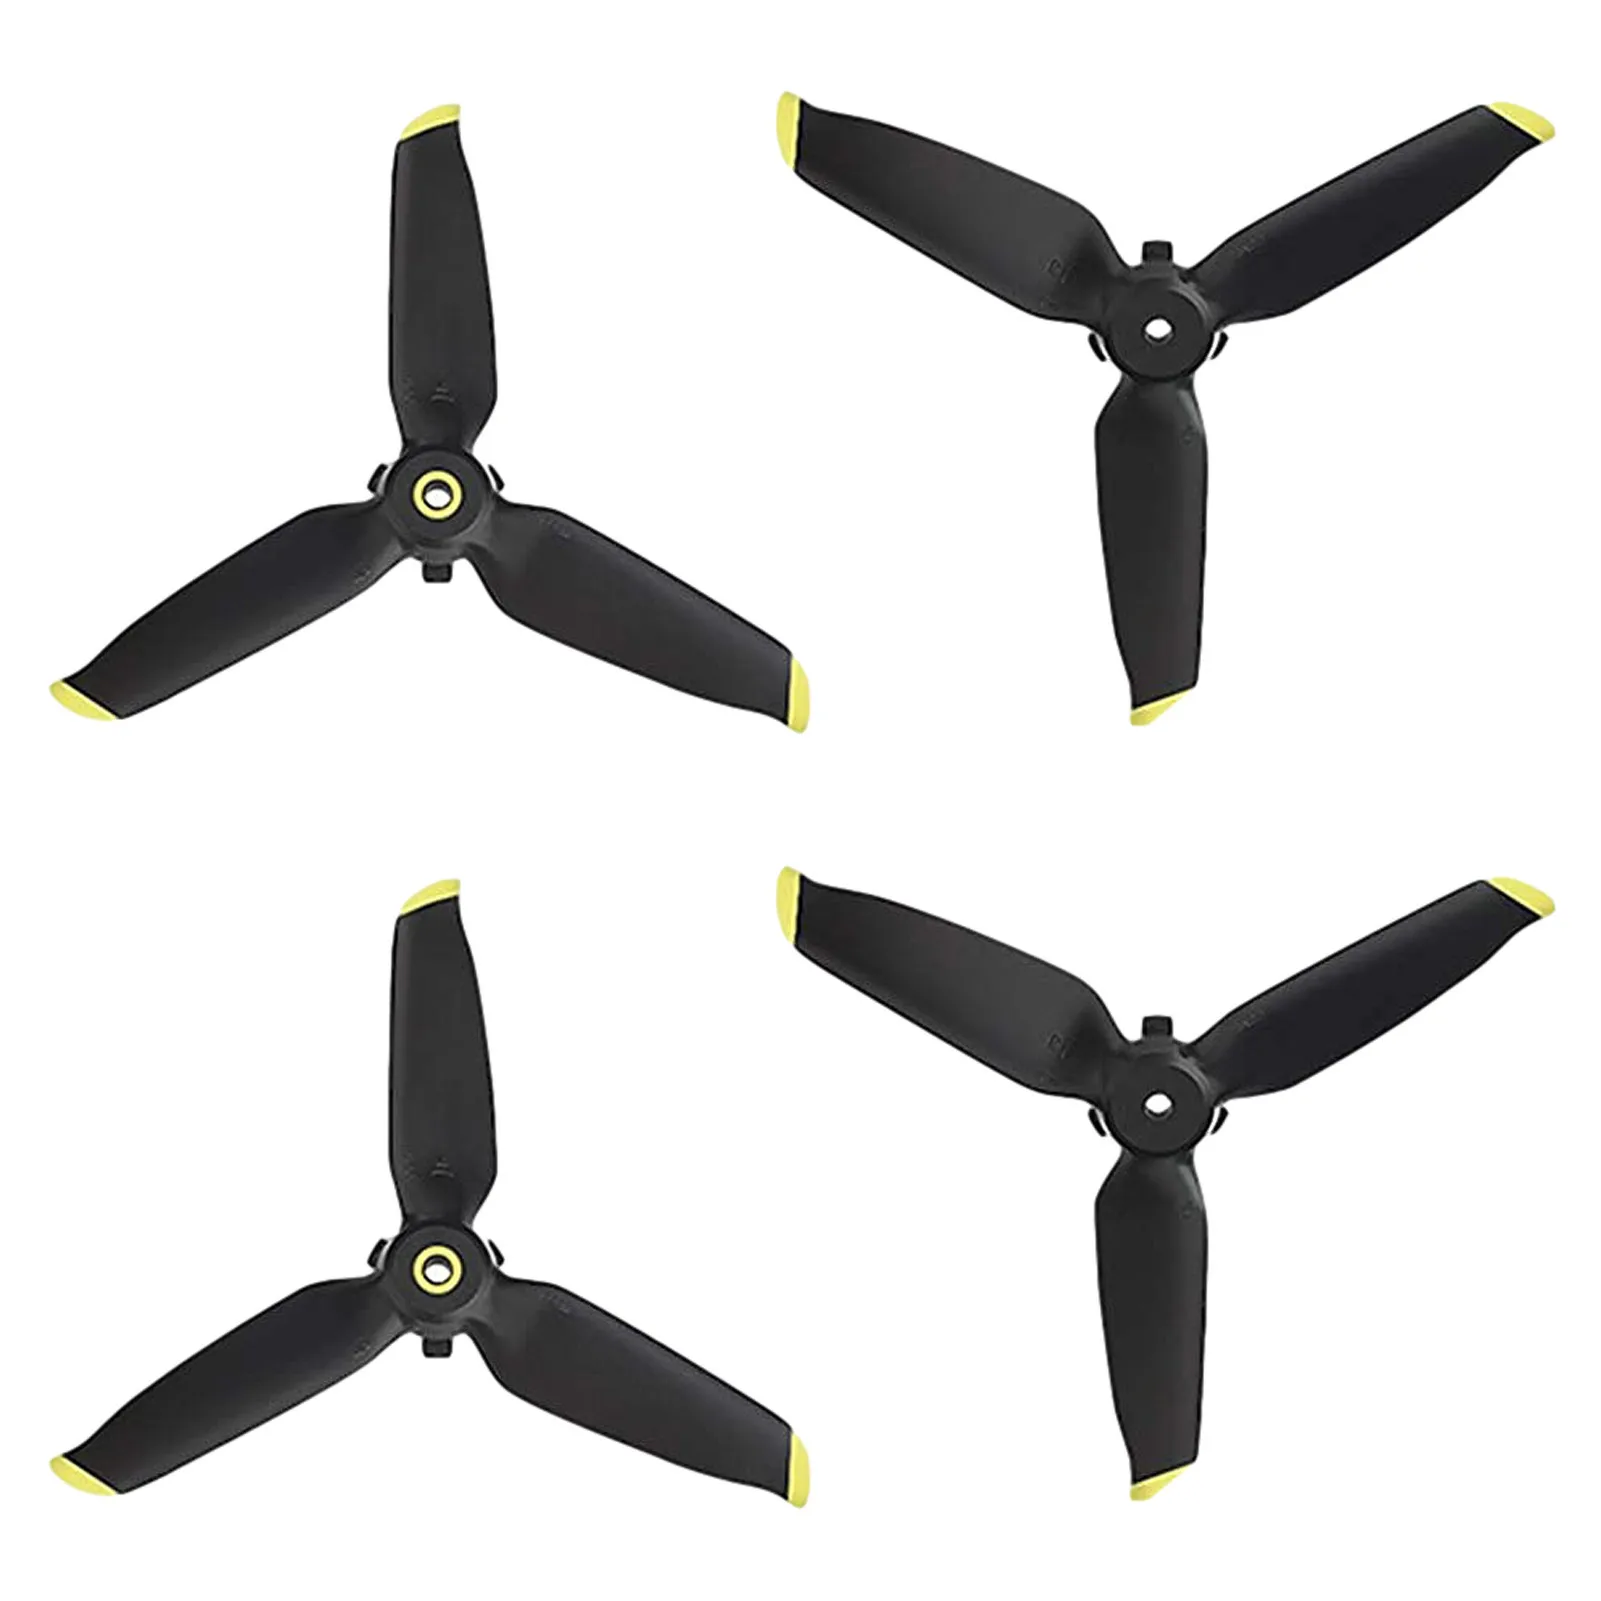 4 Pair Propeller for DJI FPV Combo 3 Leaf Paddle Blade Quick Release Flight Props for DJI FPV Drone Replacement Accessories carbon fiber propeller blades are suitable for dji fpv combo ride through aircraft drone accessories